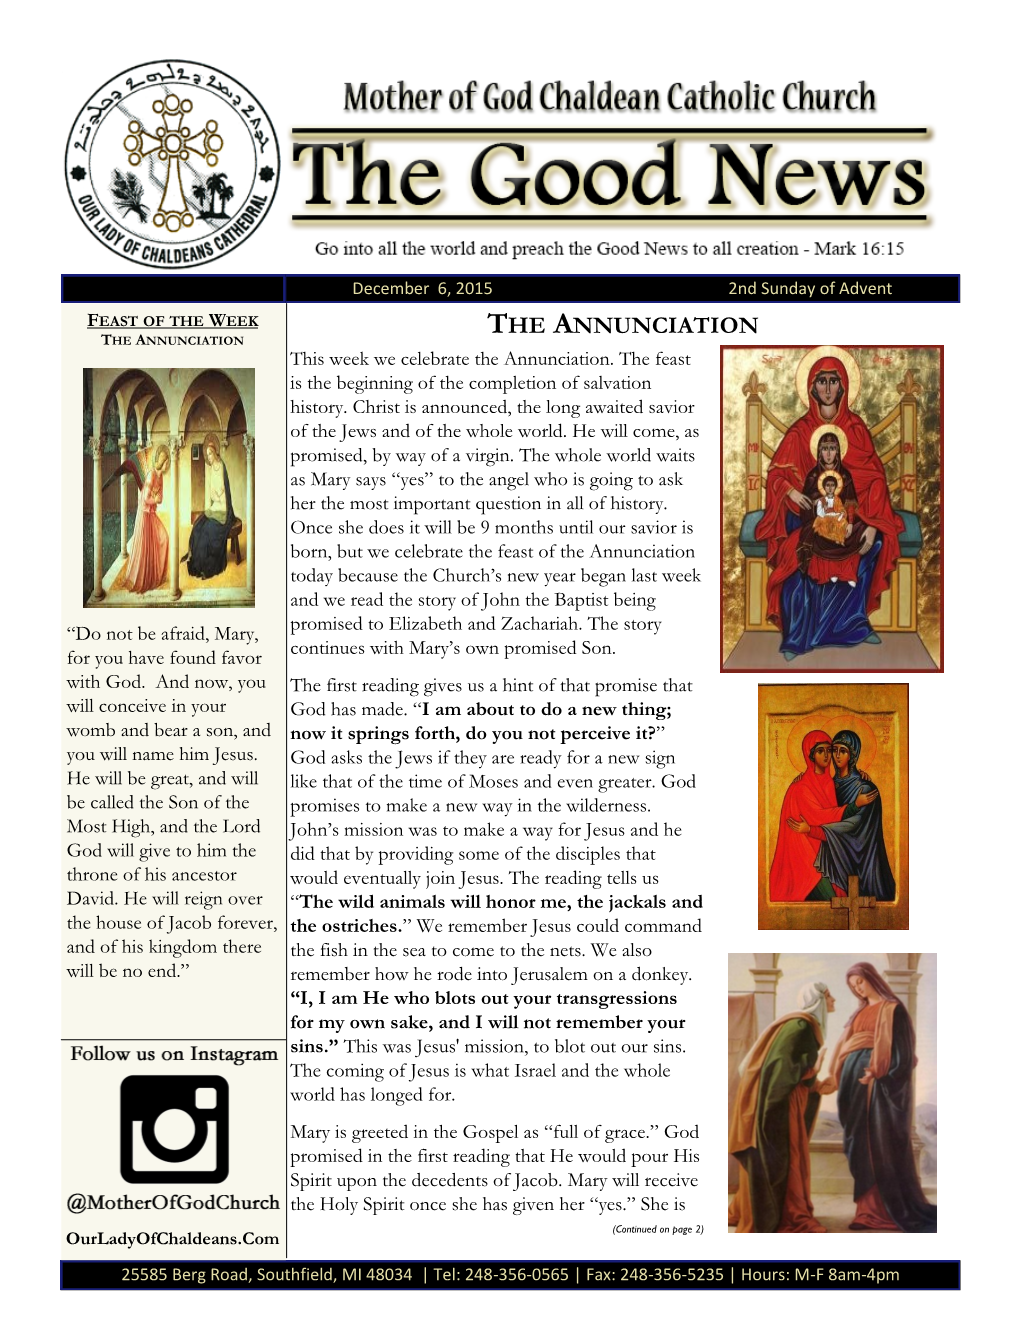 THE ANNUNCIATION the ANNUNCIATION This Week We Celebrate the Annunciation